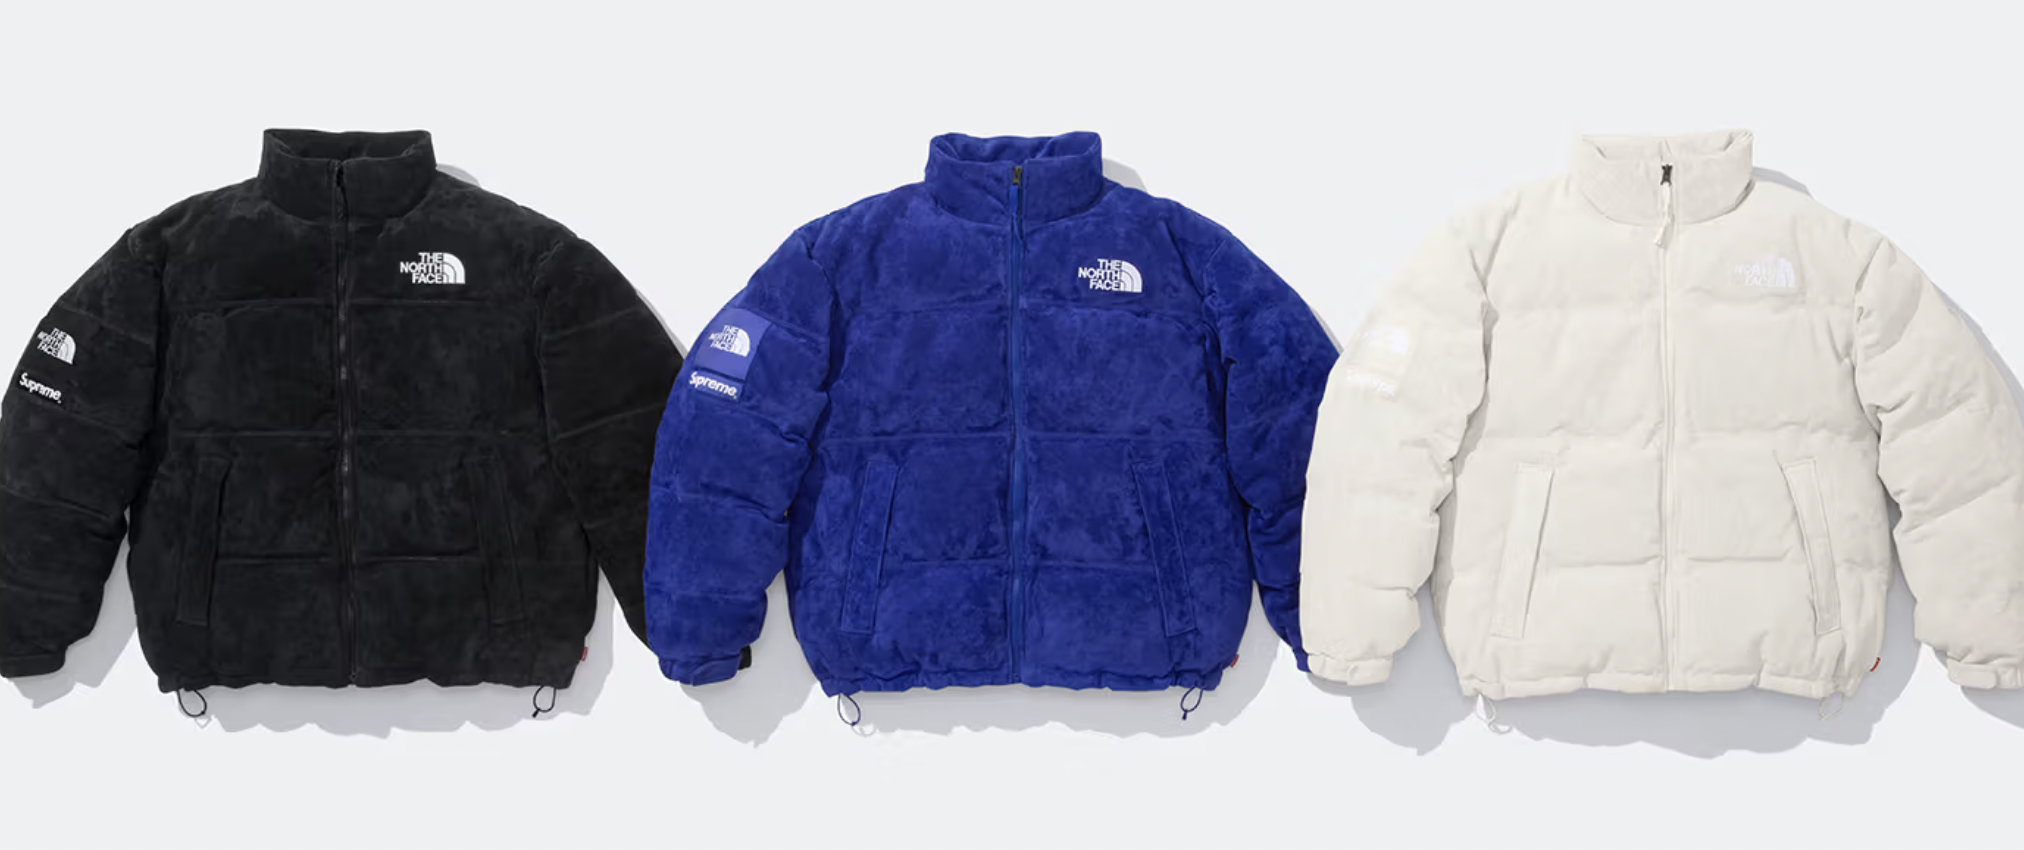 The North Face® X Supreme® Fall 2023 Collection